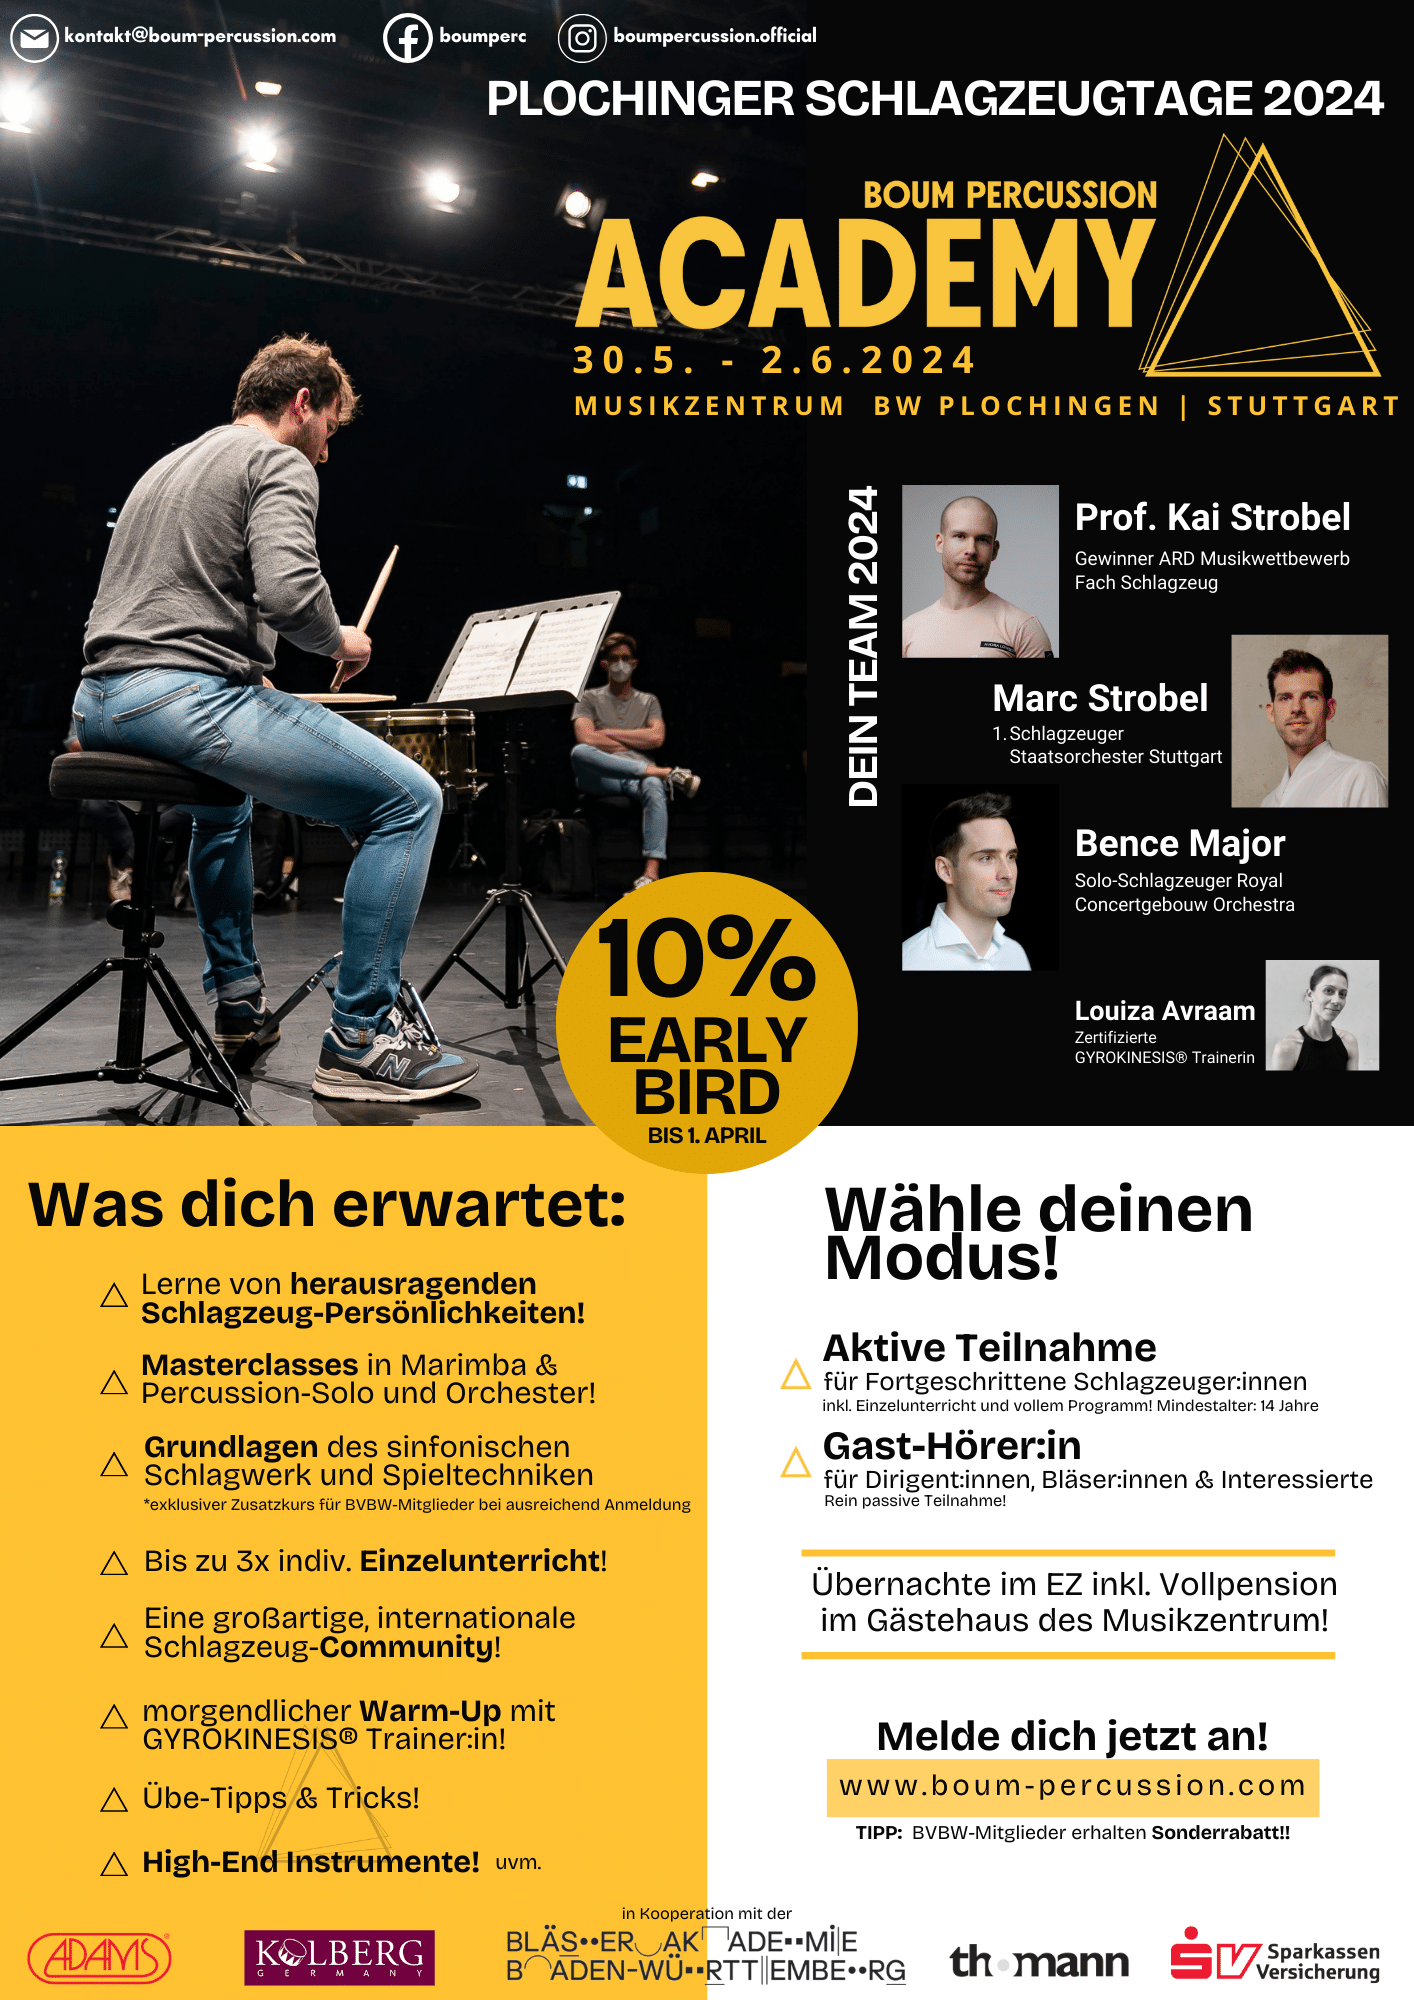 Leaflet Boum-Percussion Academy 2024 with lecturers Kai Strobel, Marc Strobel and Bence Major